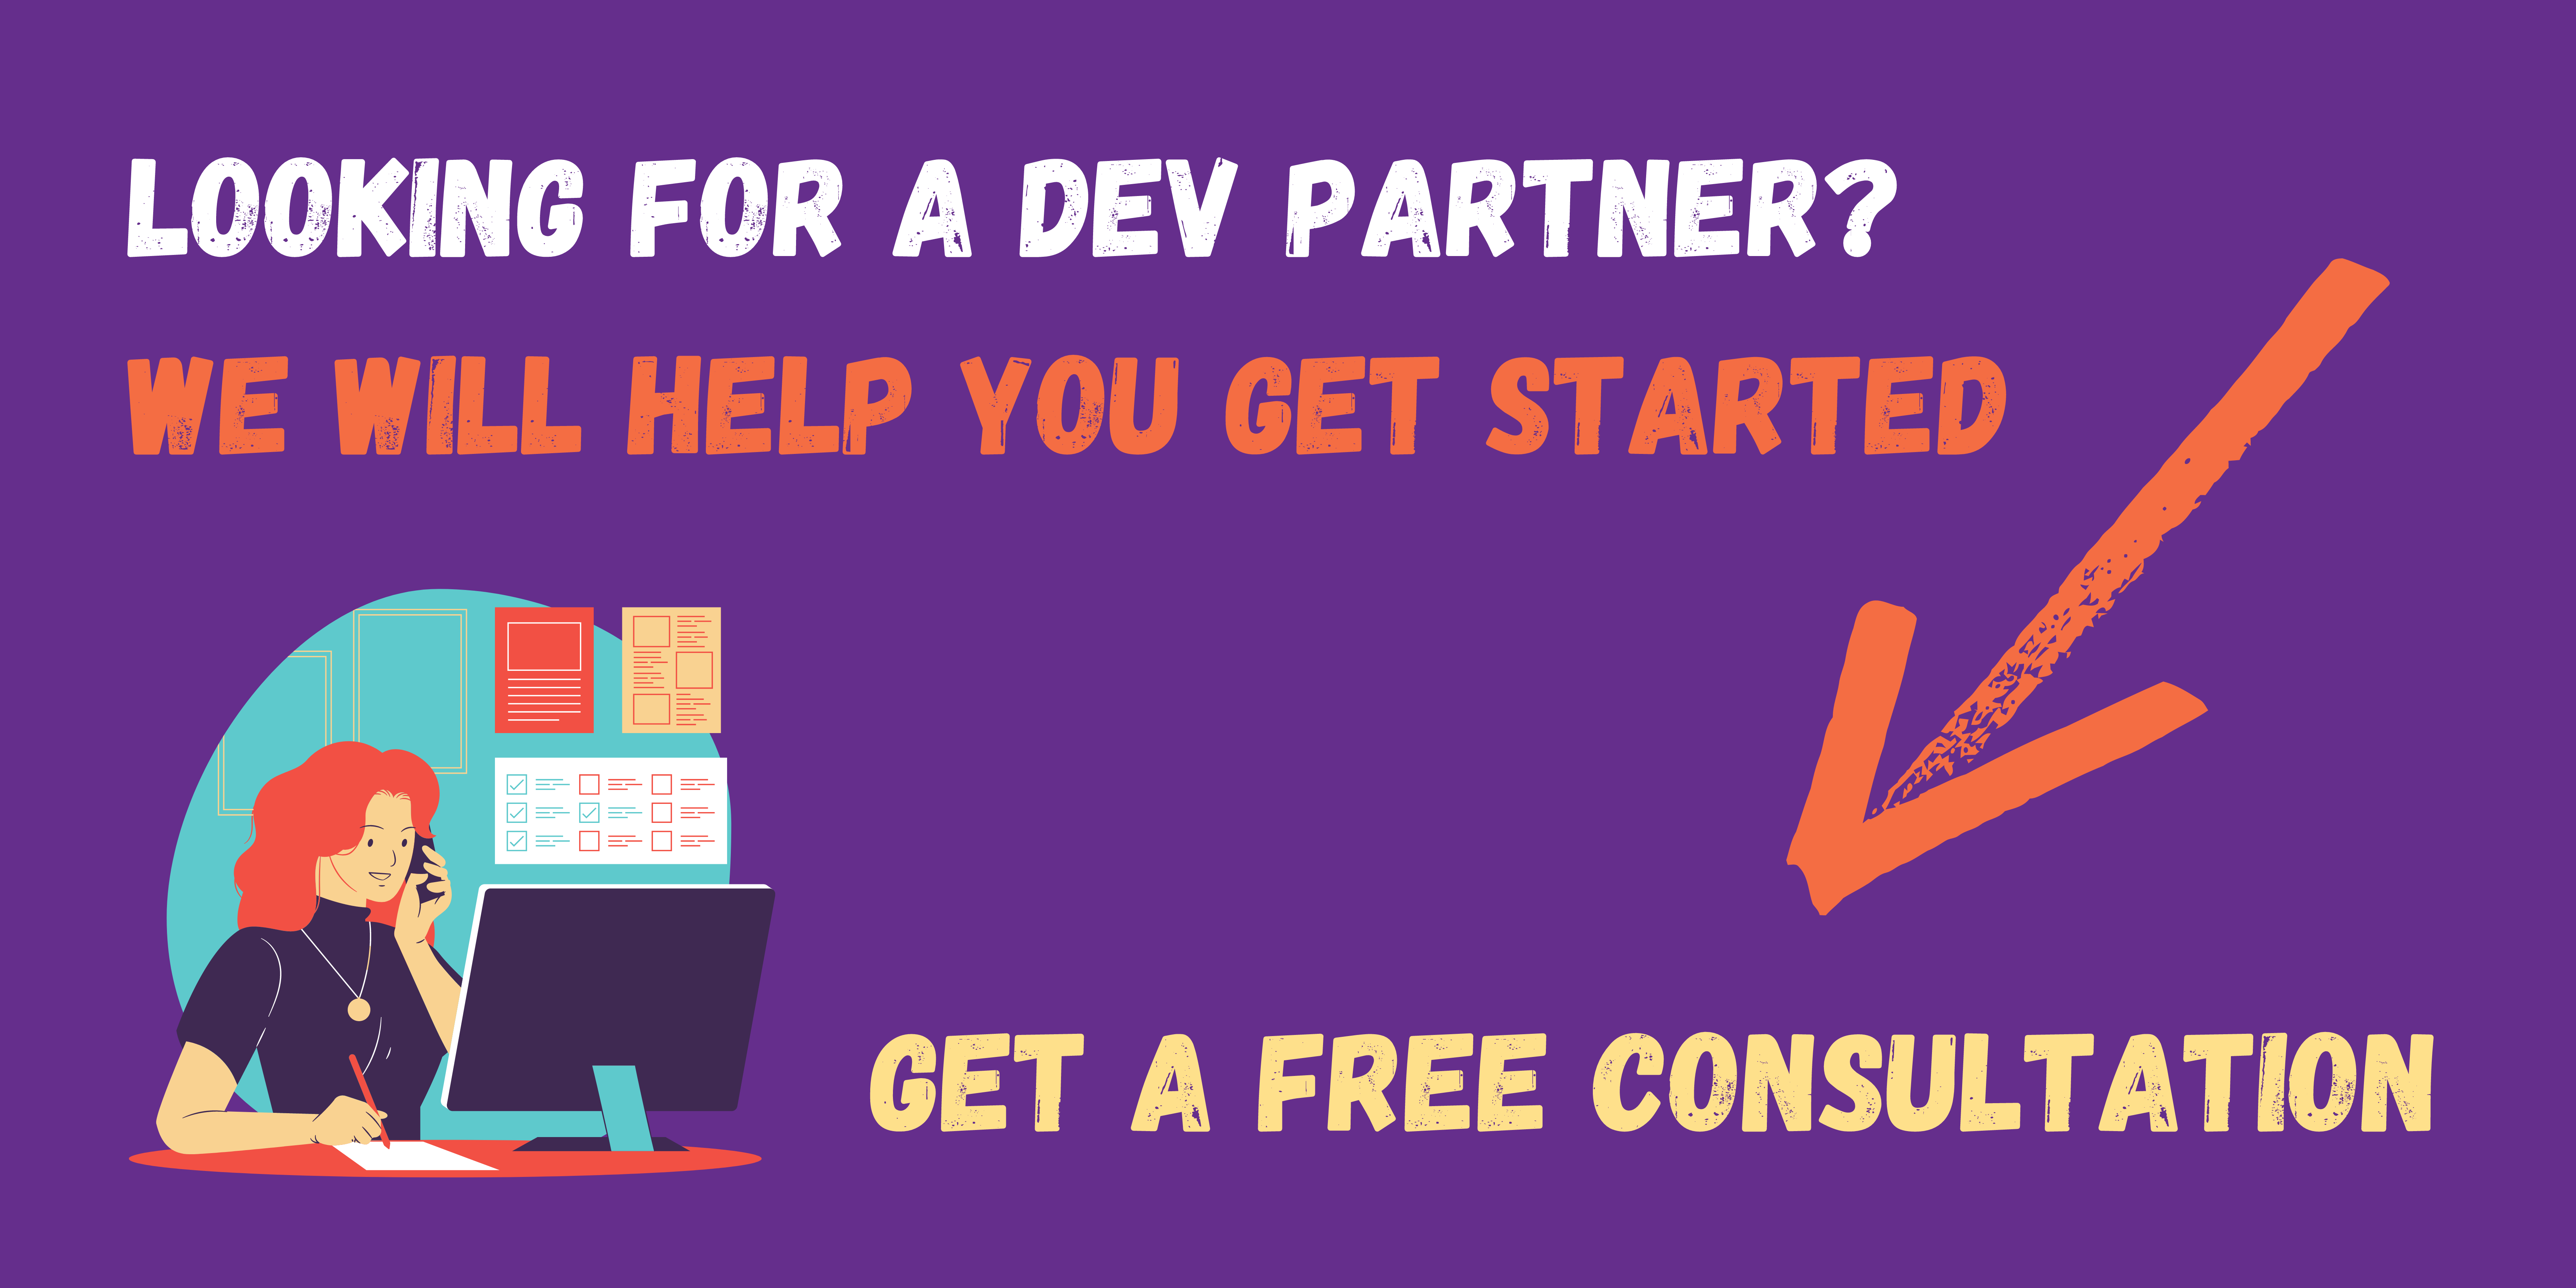 Looking for a dev partner? We will help you. Book a free consultation.